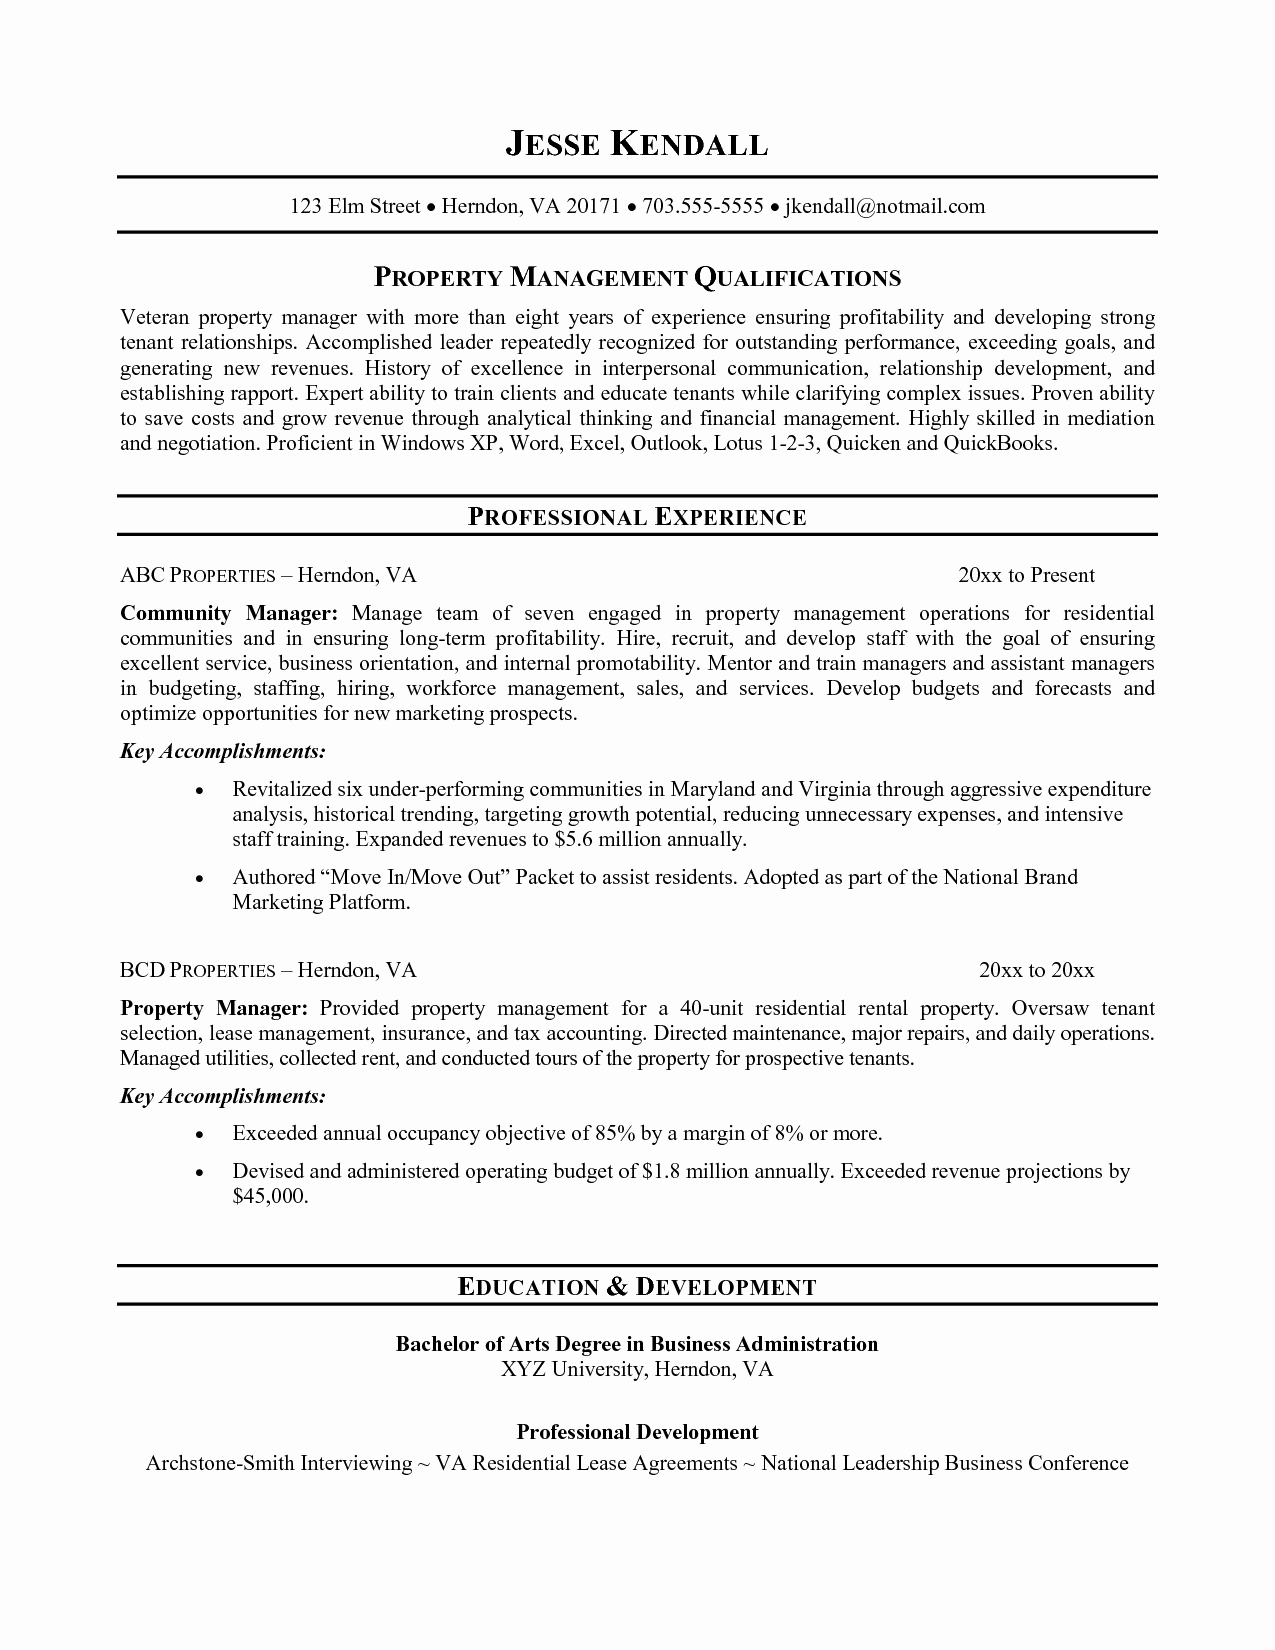 Assistant Property Manager Resume Unique Property Manager Resume Objective